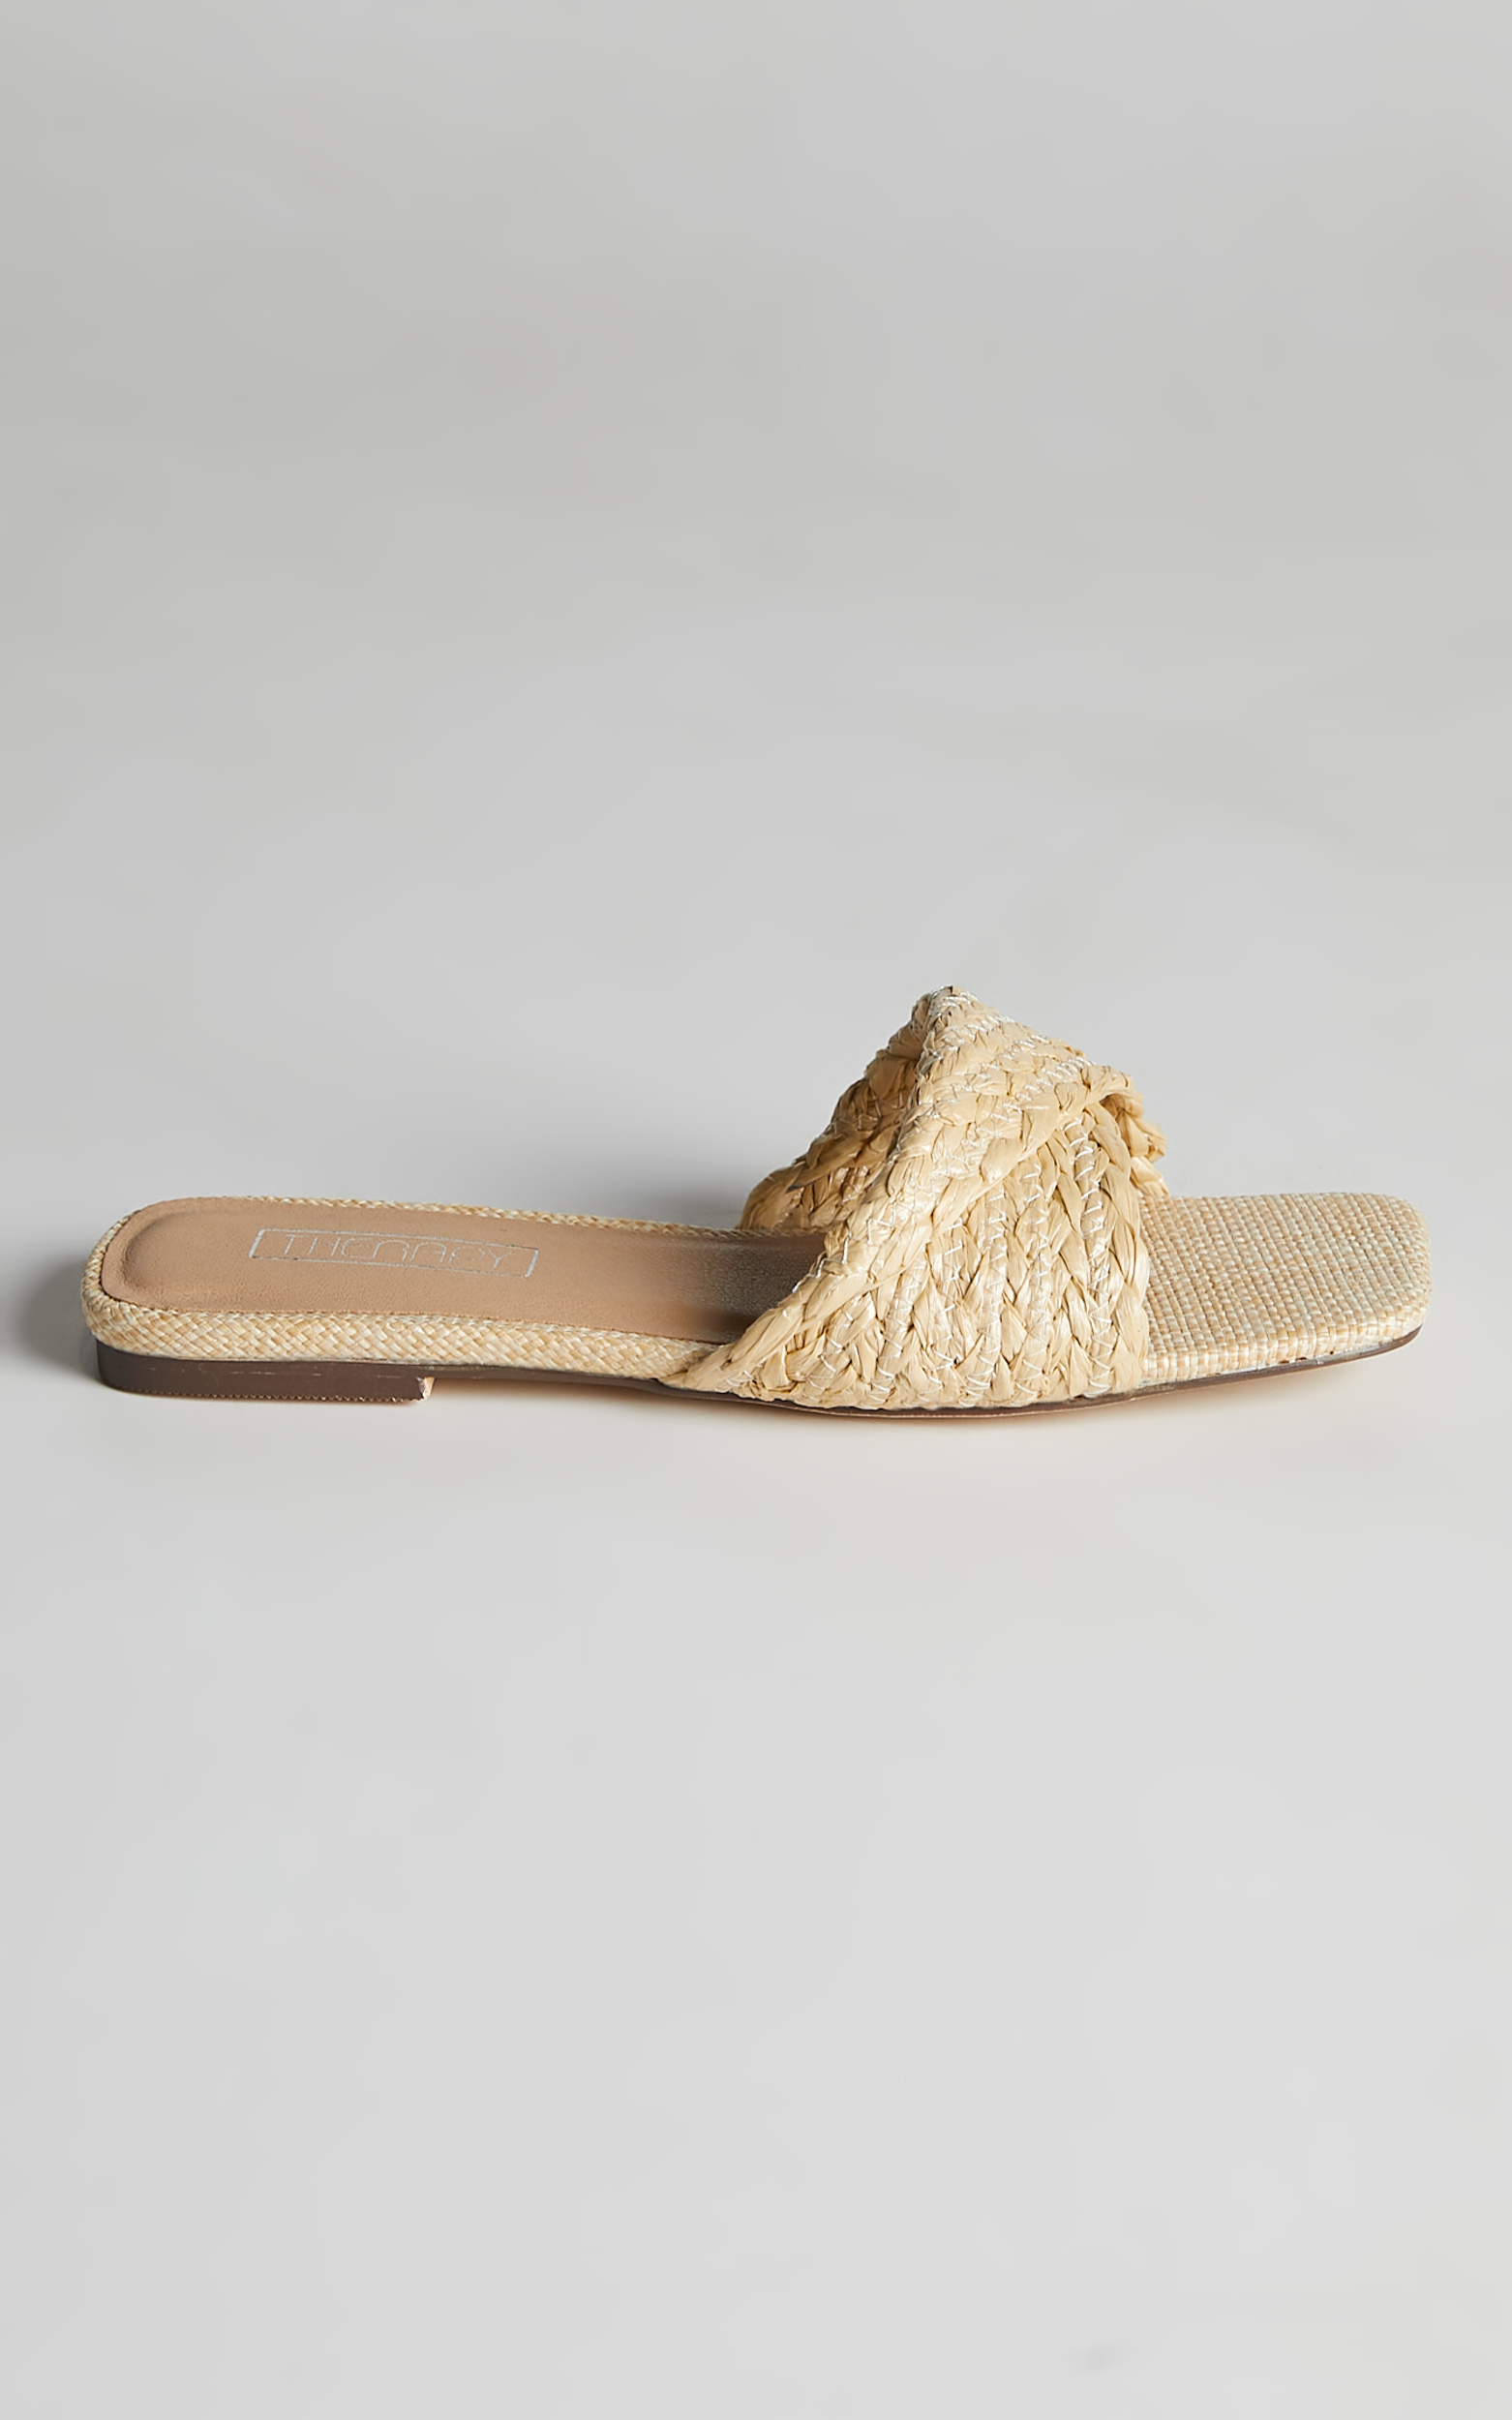 THERAPY - SHAY SANDALS in Natural Raffia - 05, NEU1, hi-res image number null